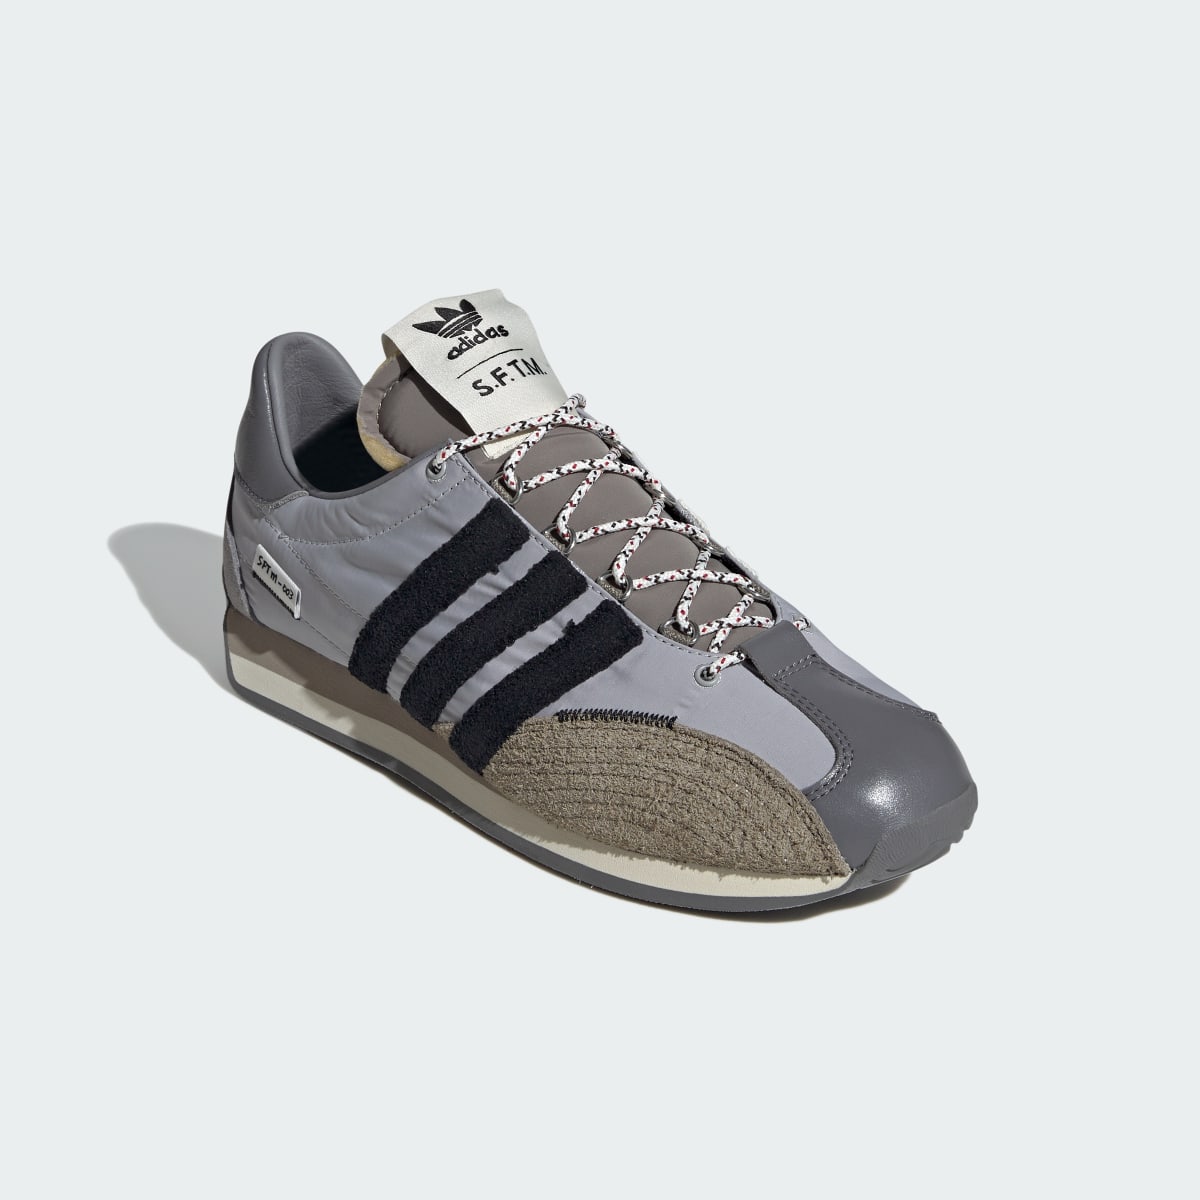 Adidas Country OG Low Trainers. 6